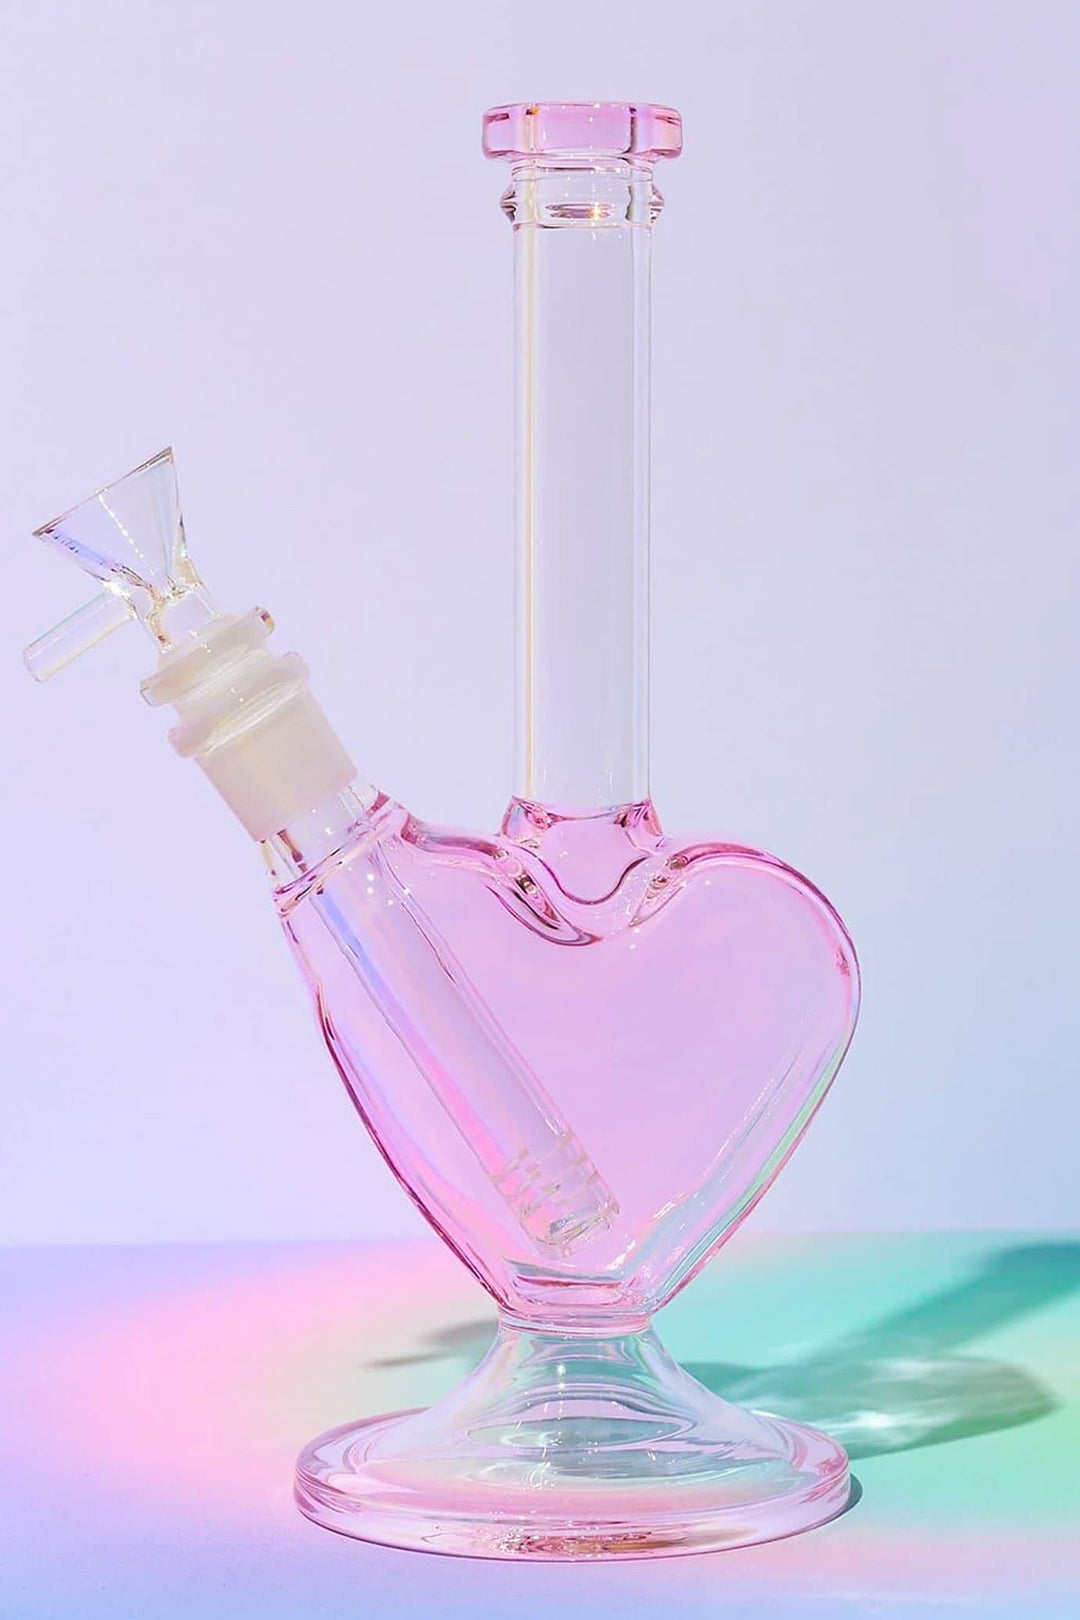 Lonely Hearts Club Bong - The SWL Store 